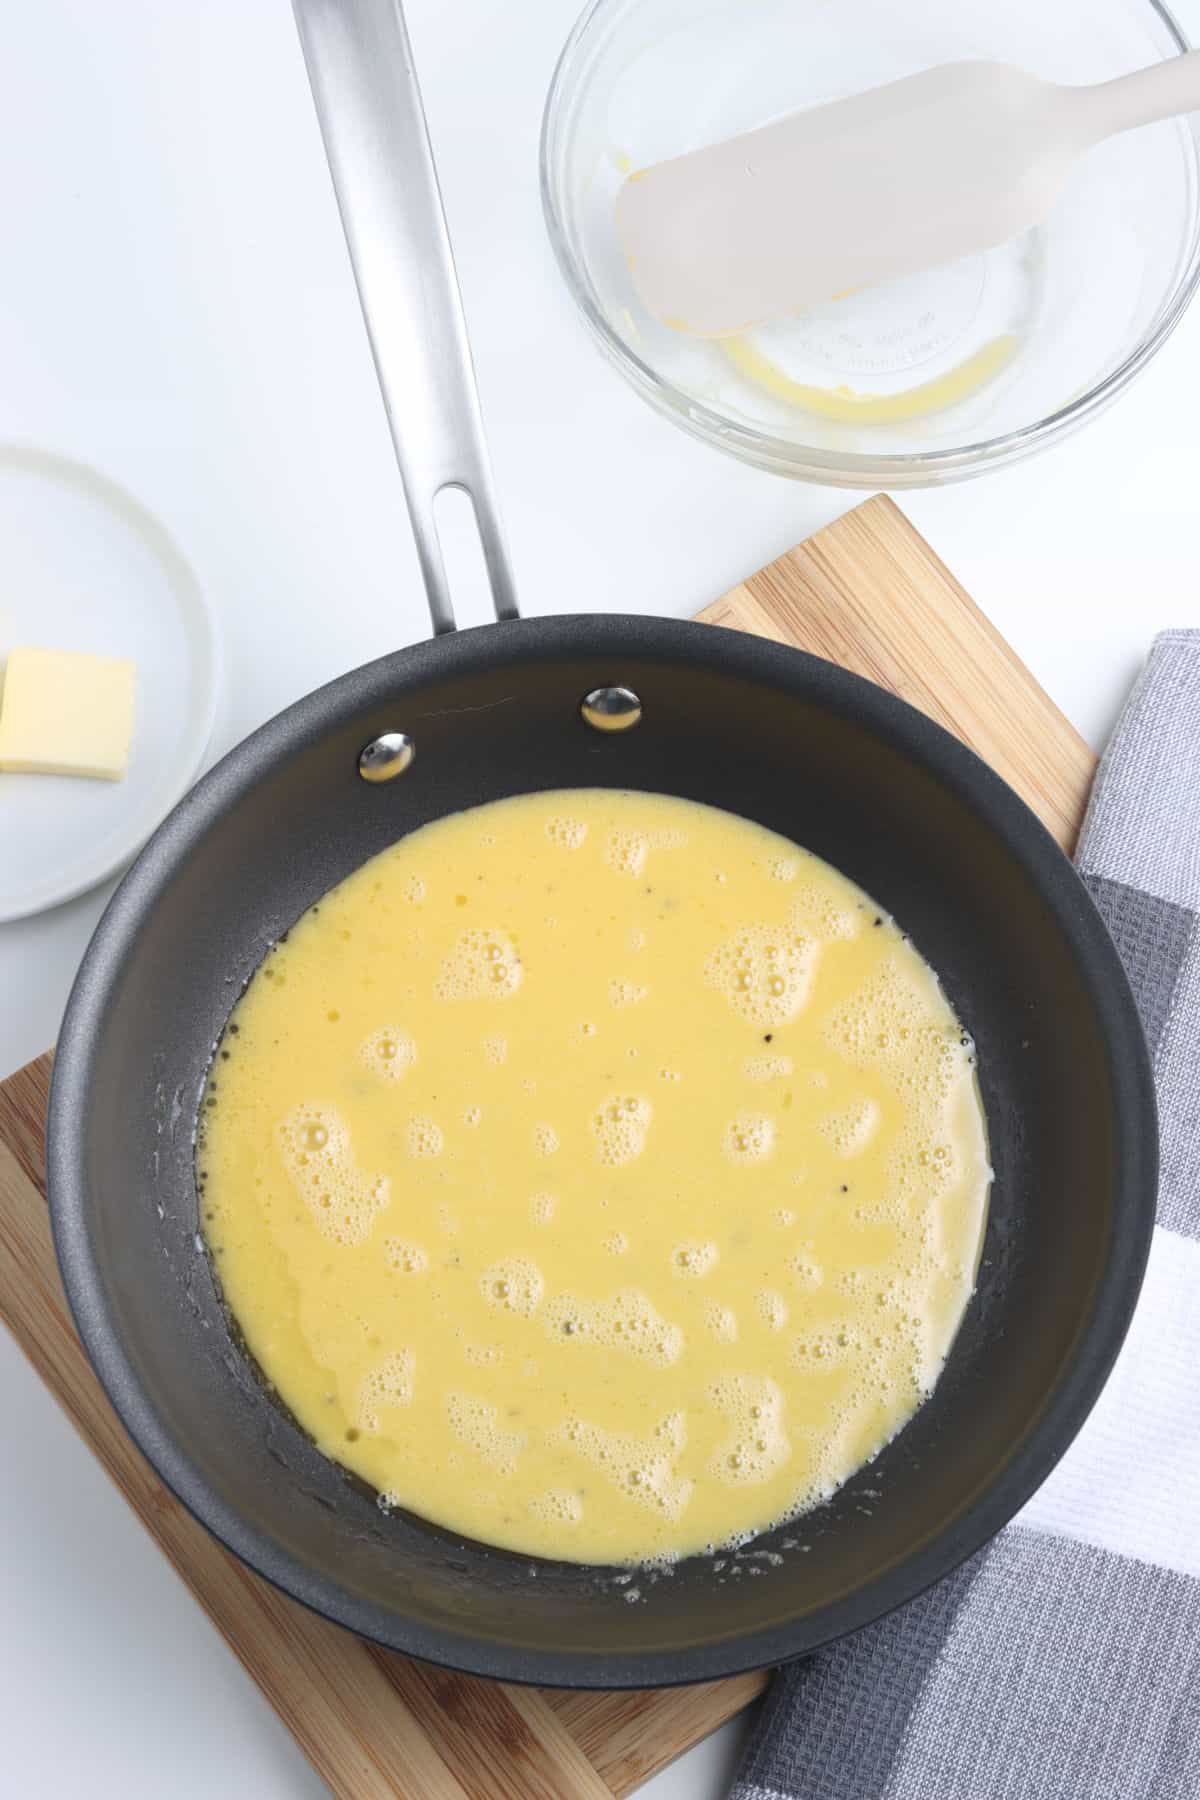 Cooking eggs in a frying pan.